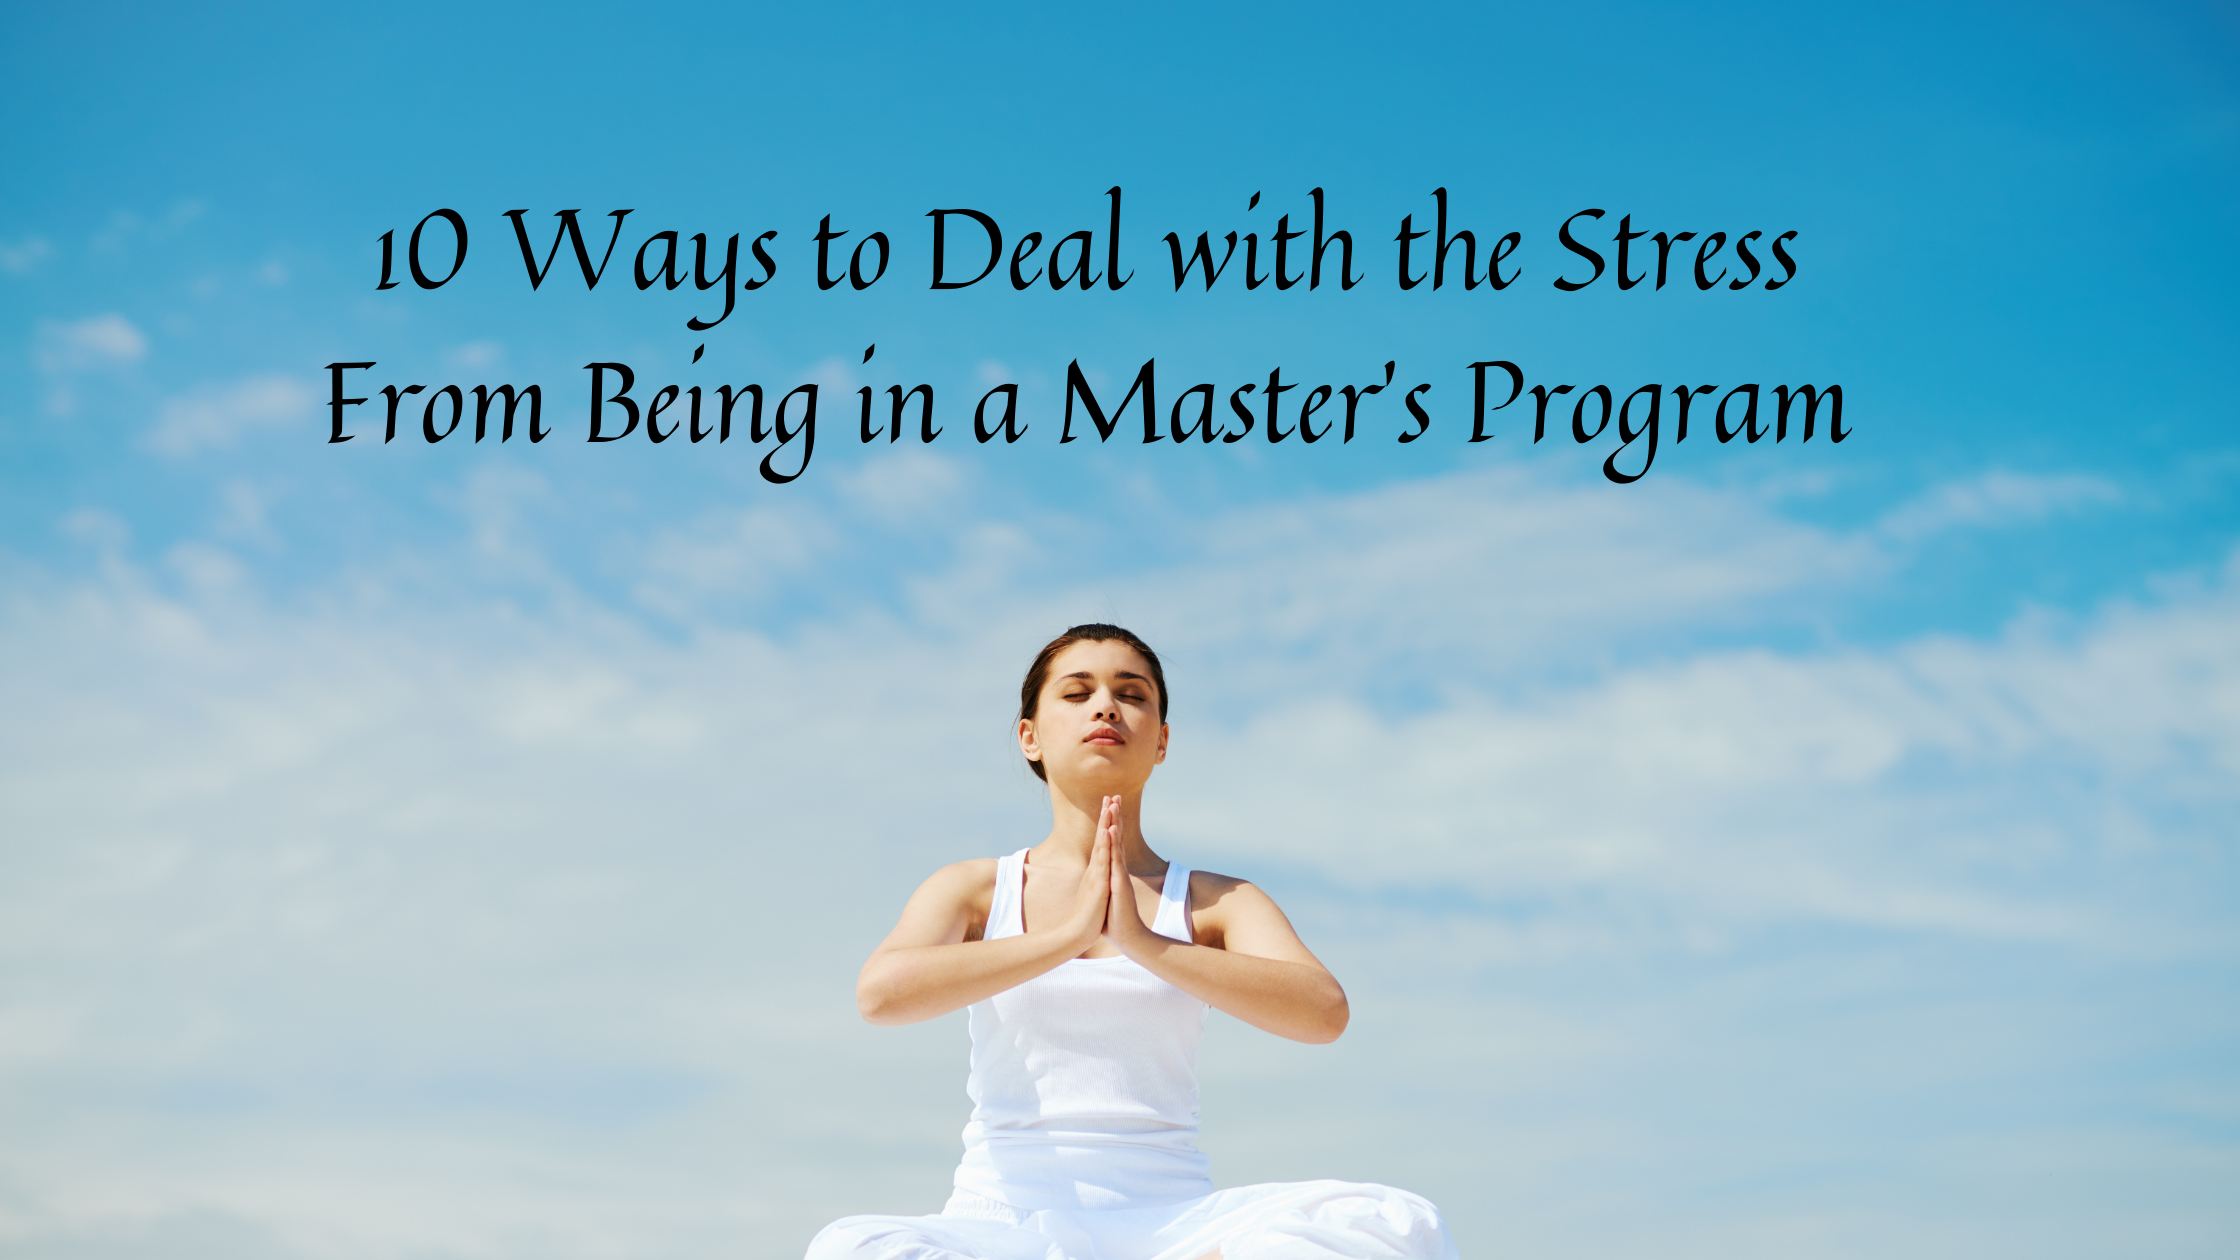 Image of Beat Master’s Program Stress with these 10 Strategies  